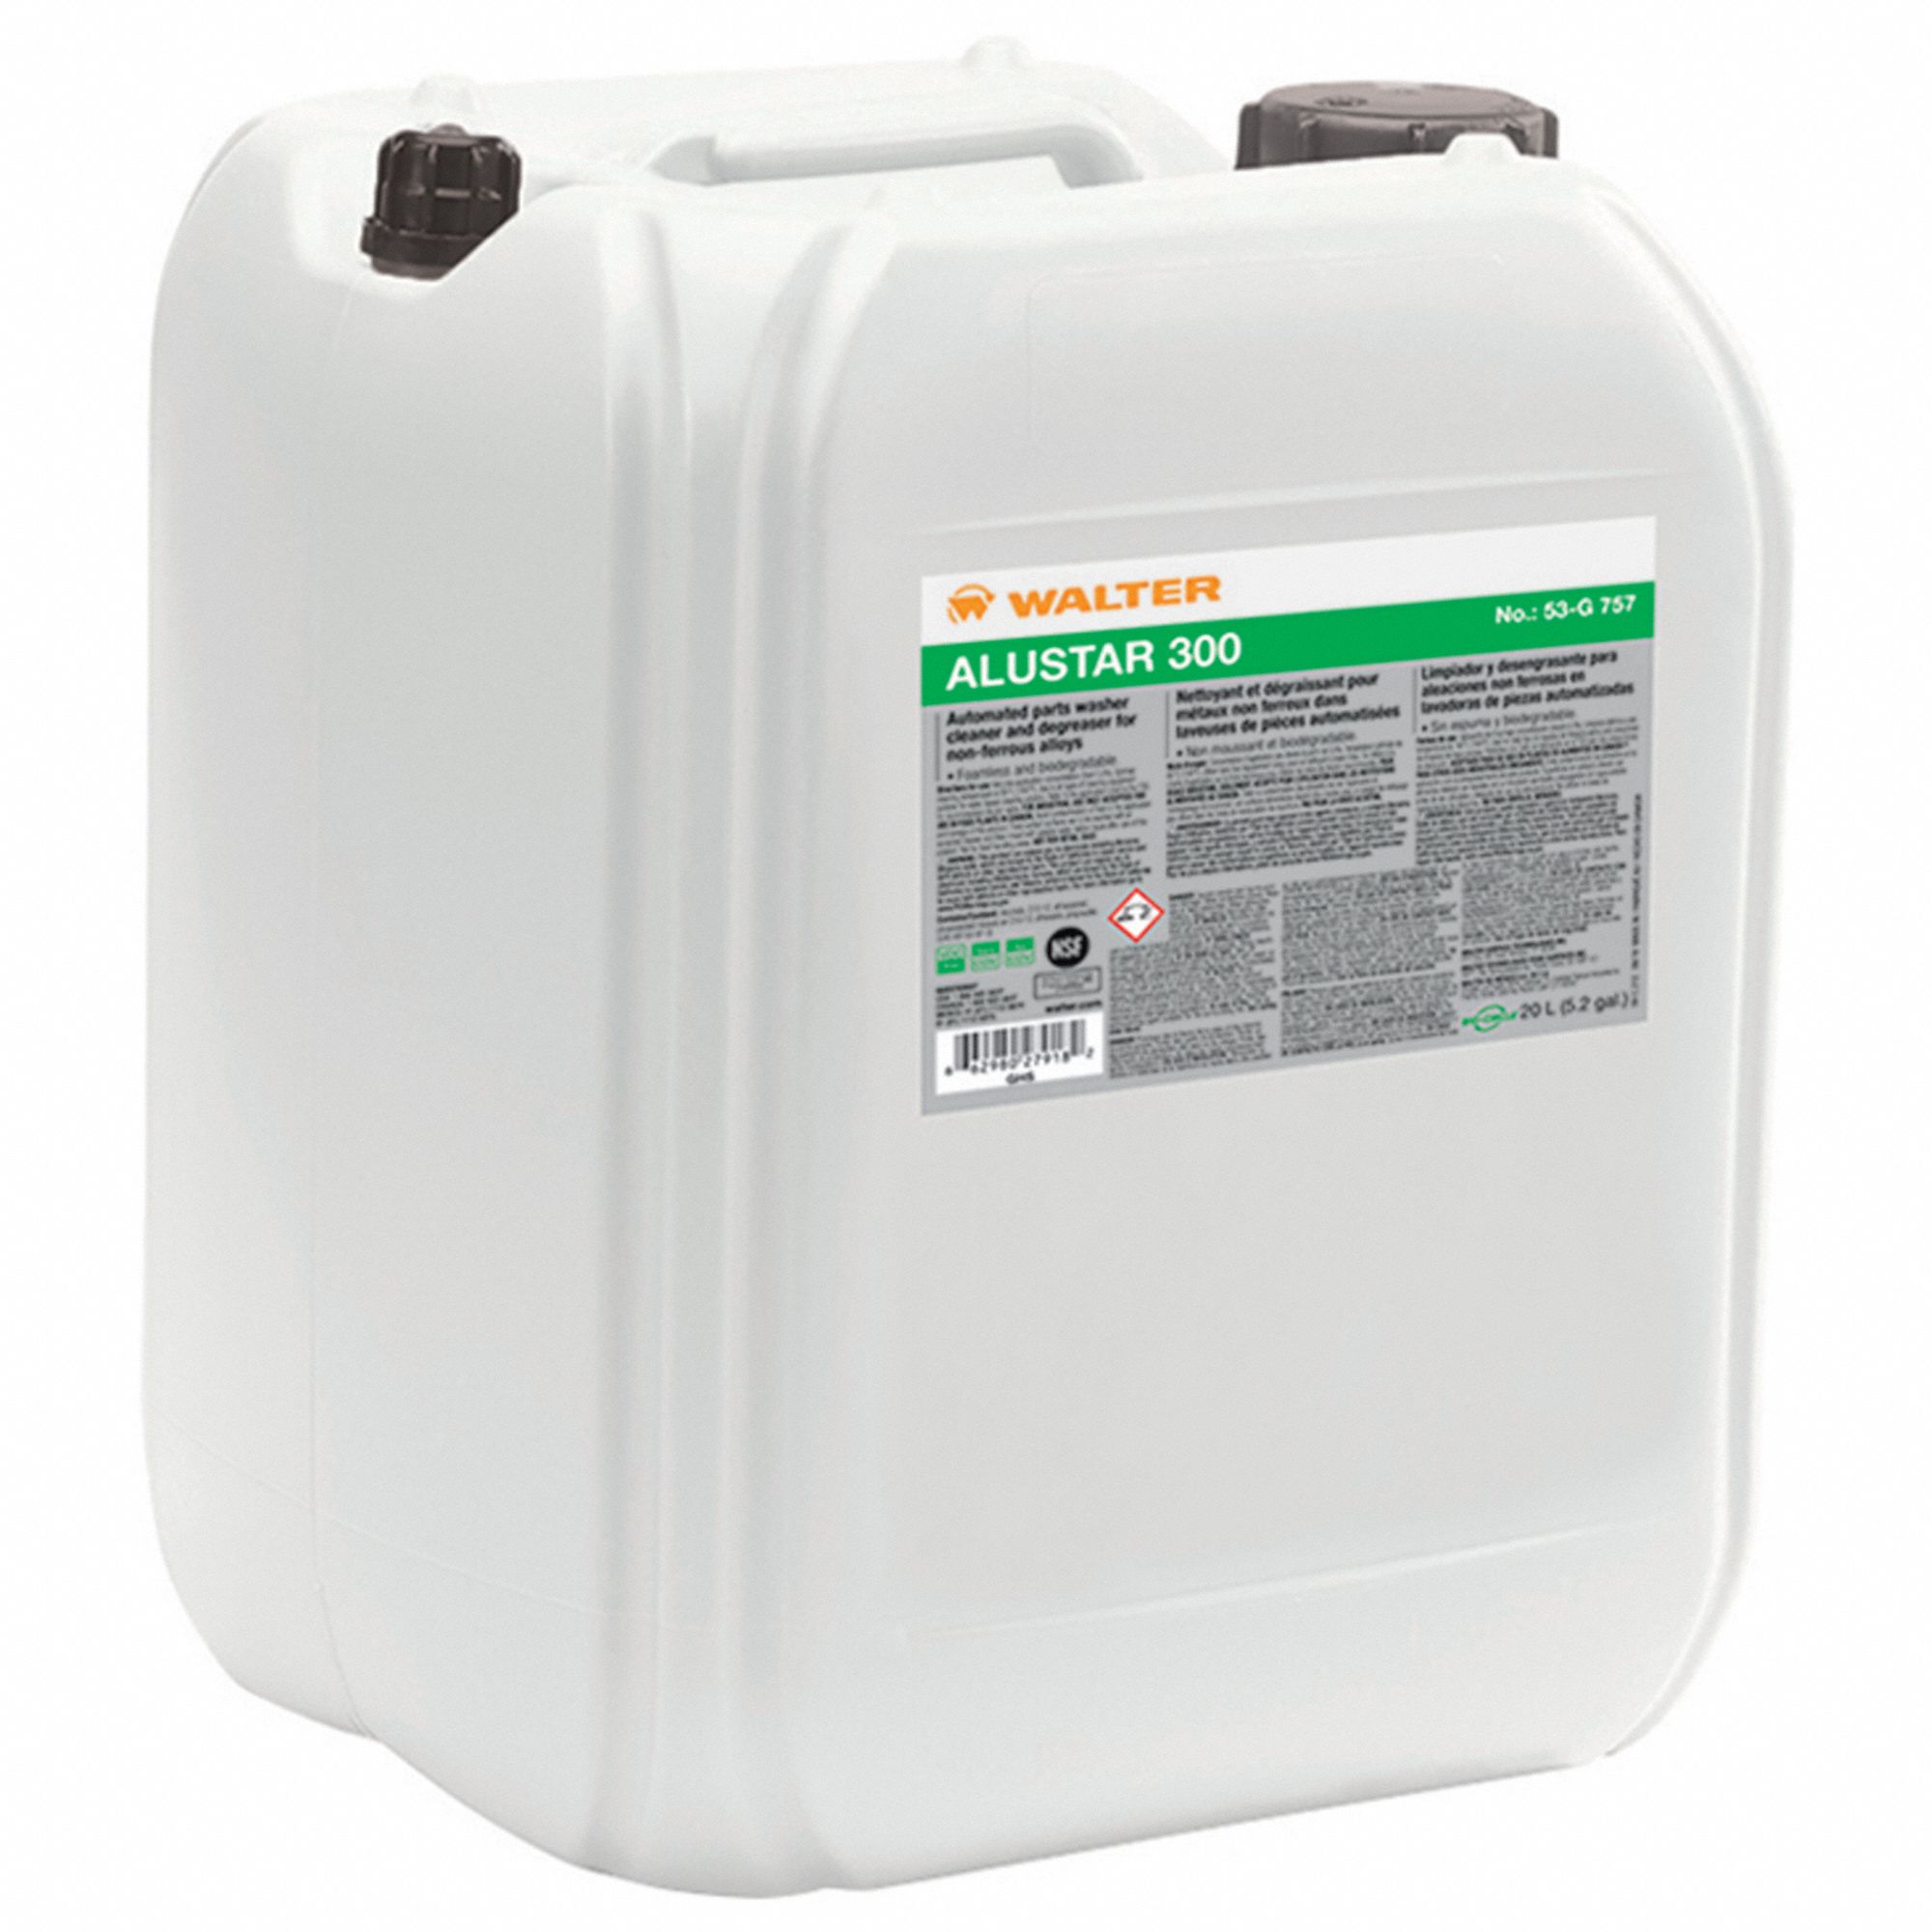 Parts Washer Cleaner: Water, Grease/Grime/Lubricants/Oil, 113°F to 149°F, ALUSTAR 300